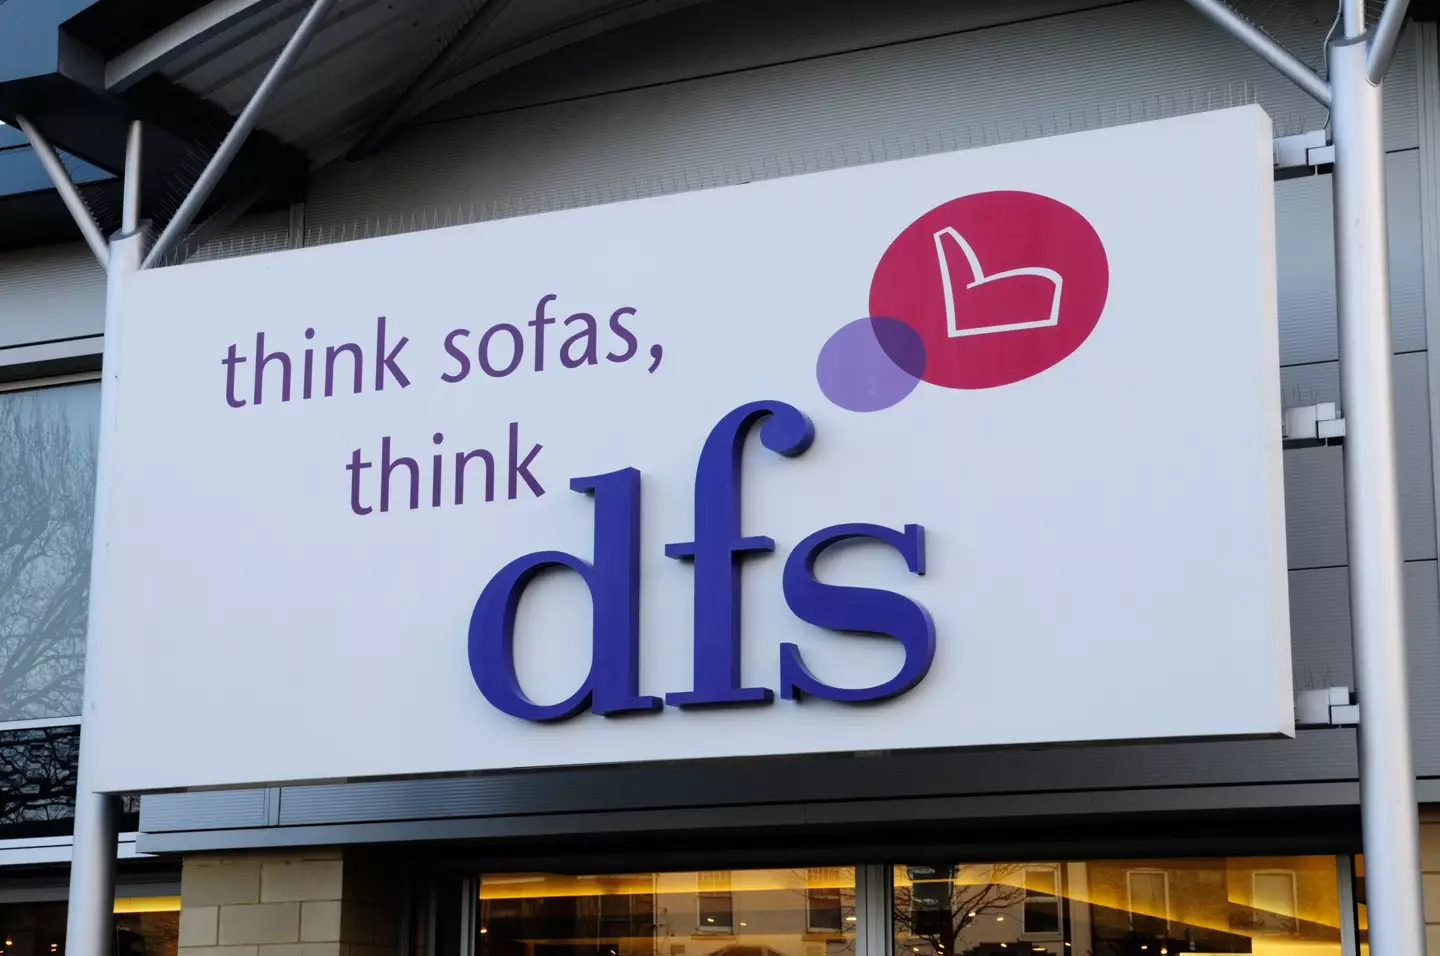 DFS have since supplied David and his wife with a temporary sofa while they wait.